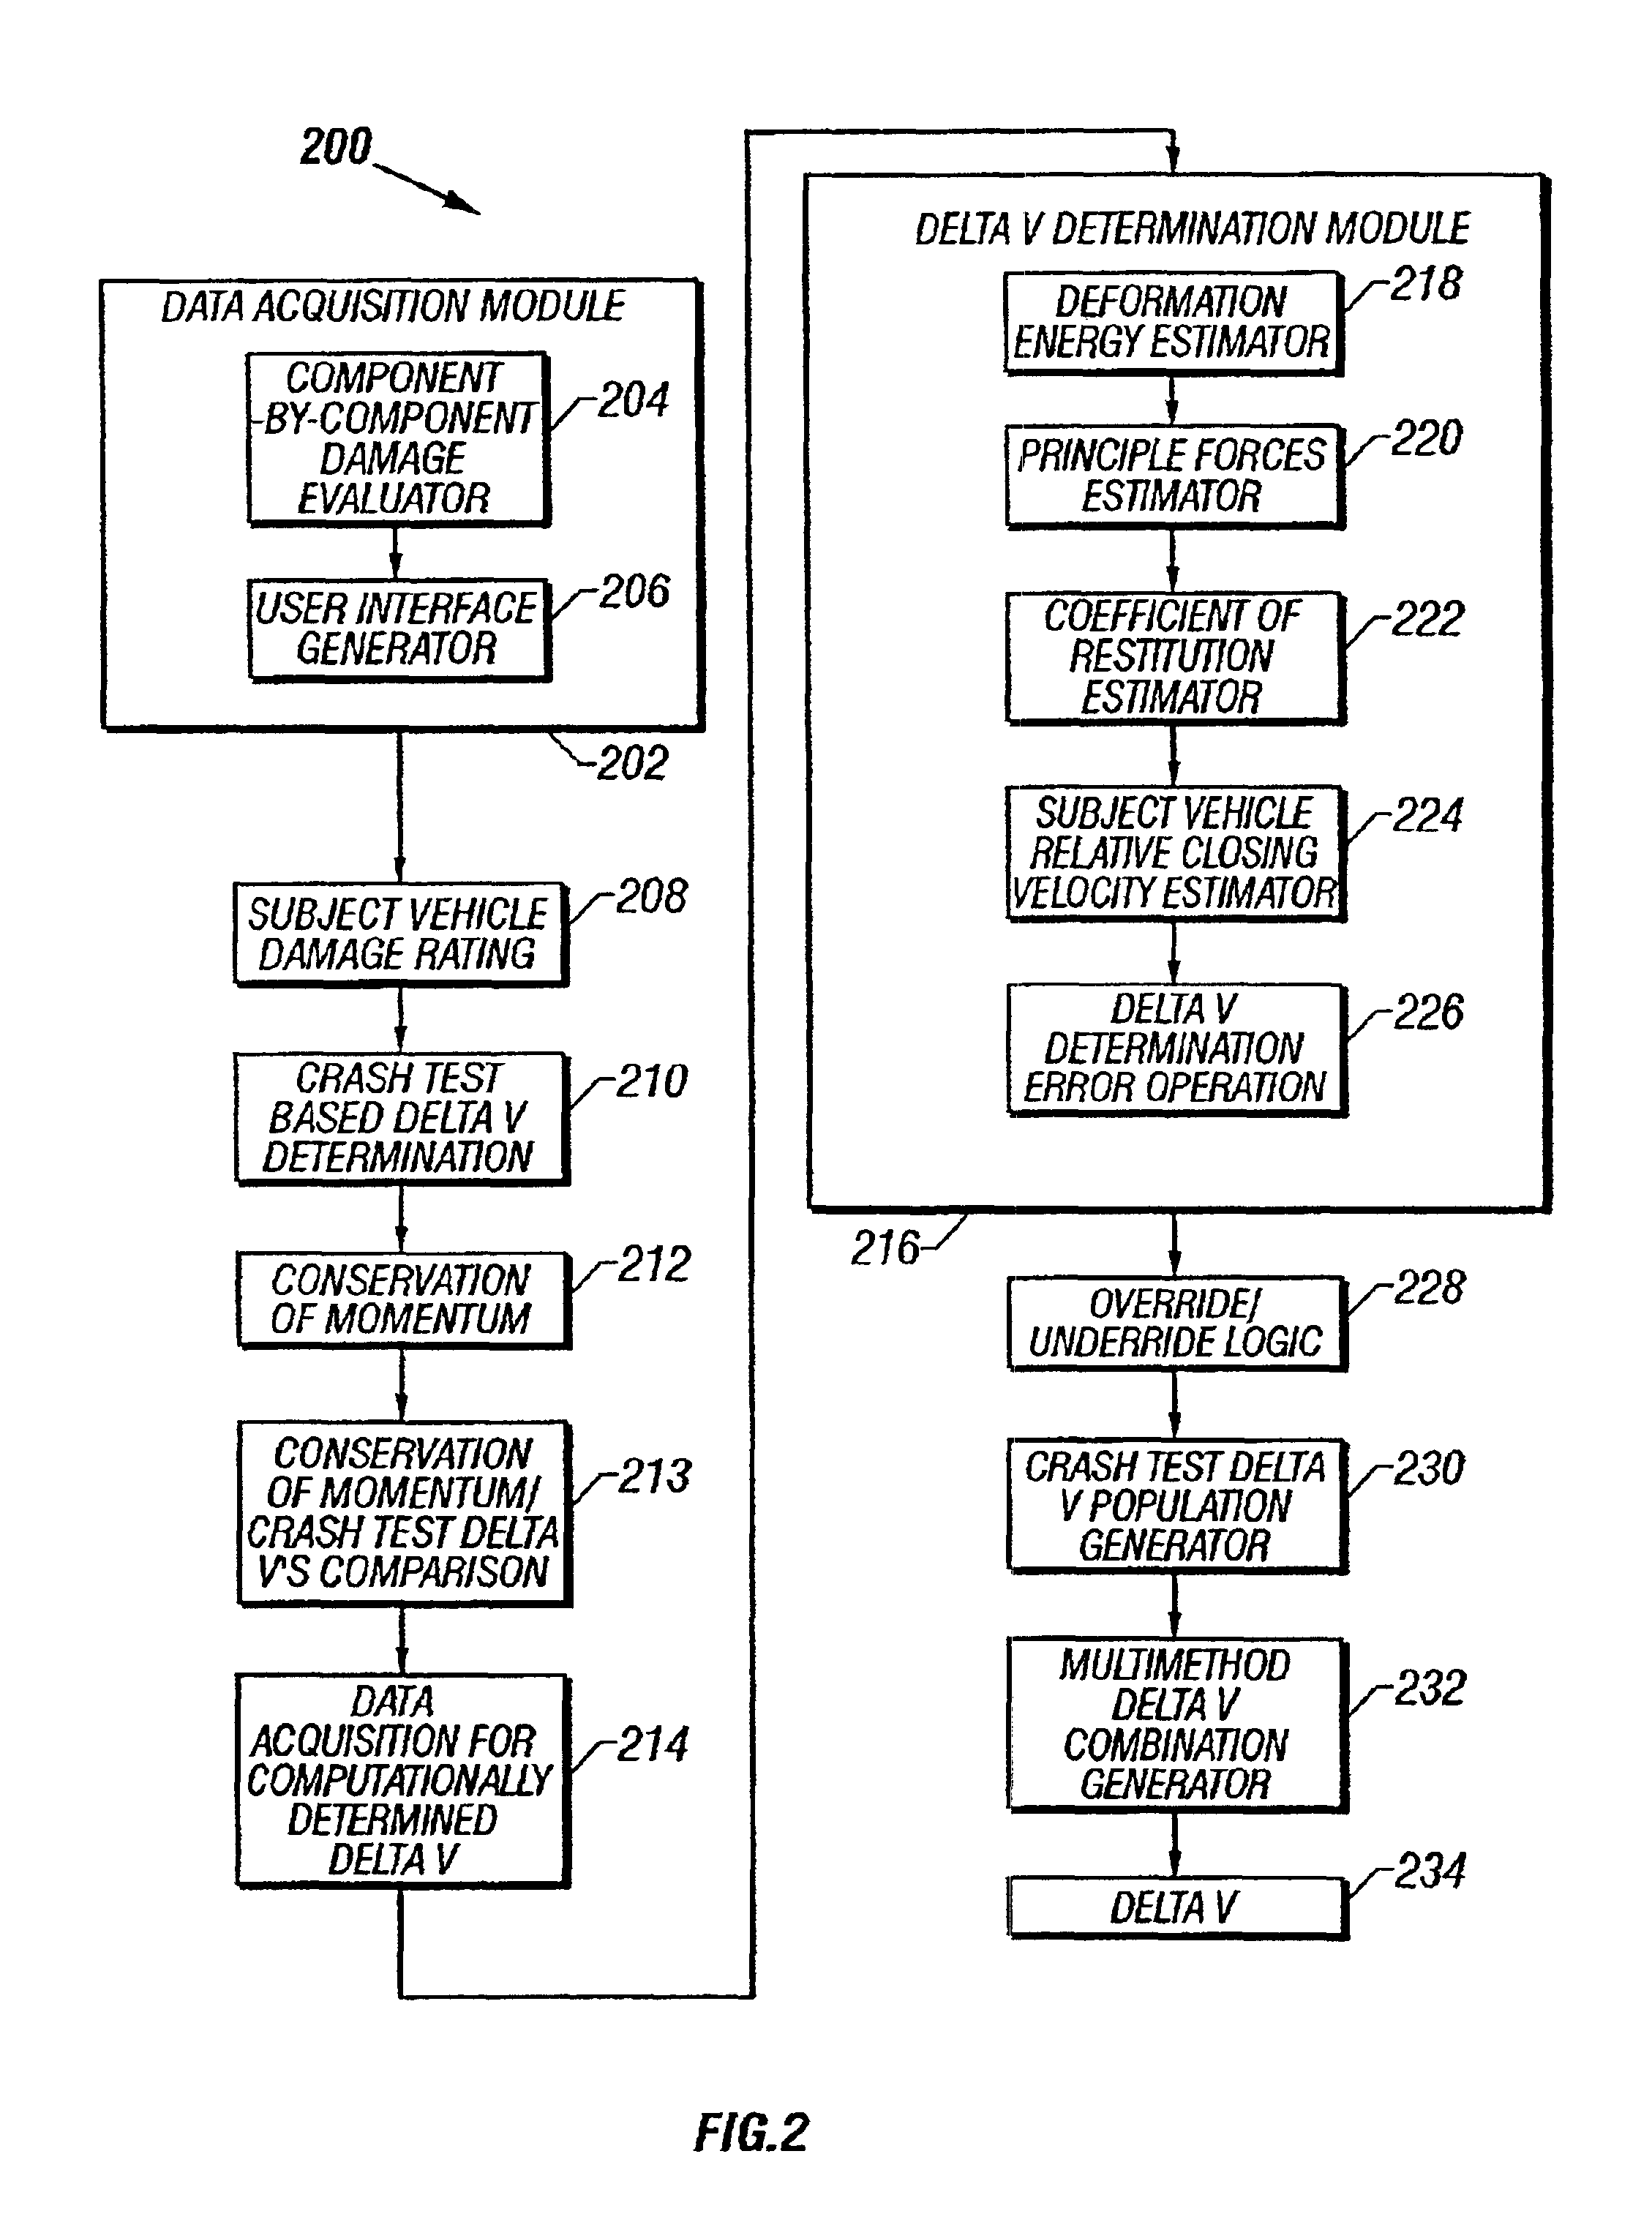 System and method for estimating post-collision vehicular velocity changes